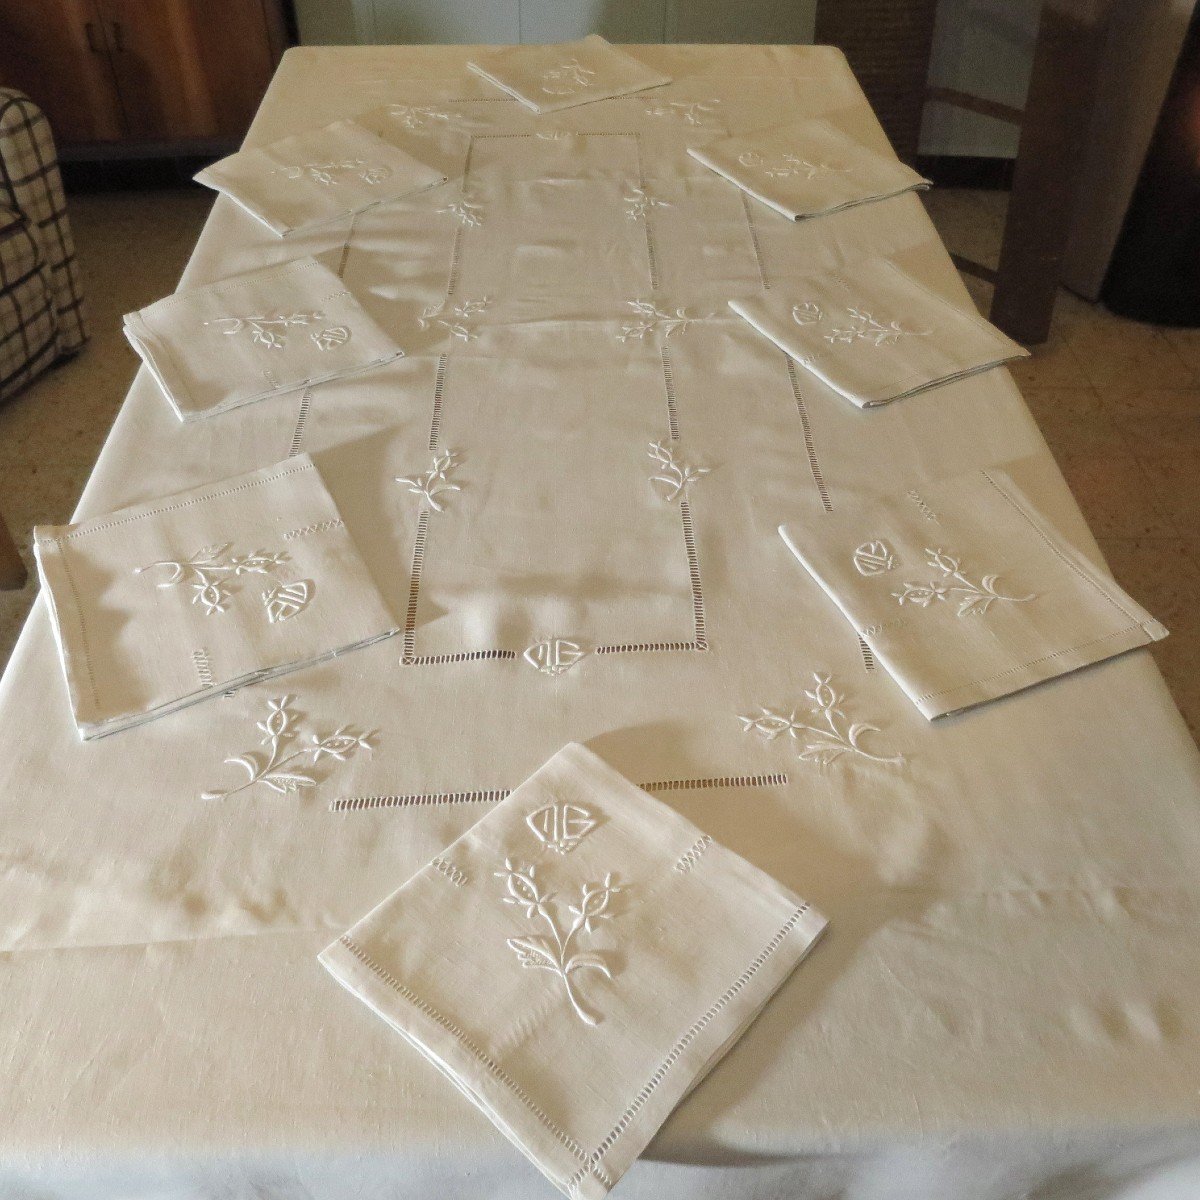 Linen Table Service, Hand Embroidered, Monogrammed Mb, Circa 1925